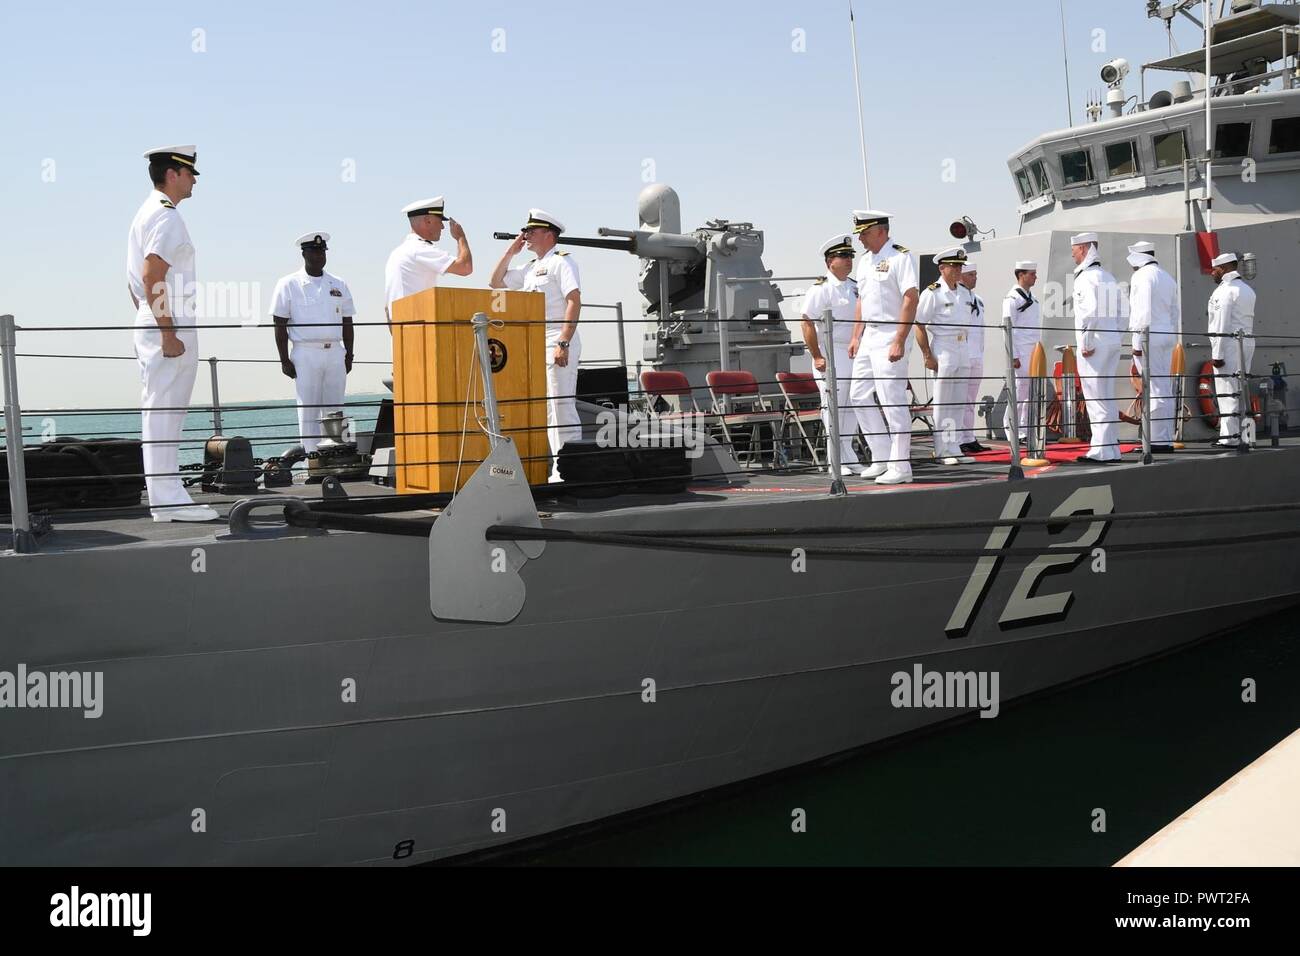 MANAMA, Bahrain (June 27, 2017) From left, Lt. Cmdr. Timothy Yuhas, a native of Cave Creek, Arizona and former commanding officer of the Cyclone-class coastal patrol ship USS Thunderbolt (PC 12), salutes Lt. Cmdr. Michael T. McArawas, a native of Erie, Pennsylvania and current commanding officer, during a change of command ceremony held shipboard while pierside at Naval Support Activity Bahrain. Thunderbolt is one of 10 PCs forward deployed to Manama, Bahrain, whose mission is coastal patrol and interdiction surveillance. ( Stock Photo